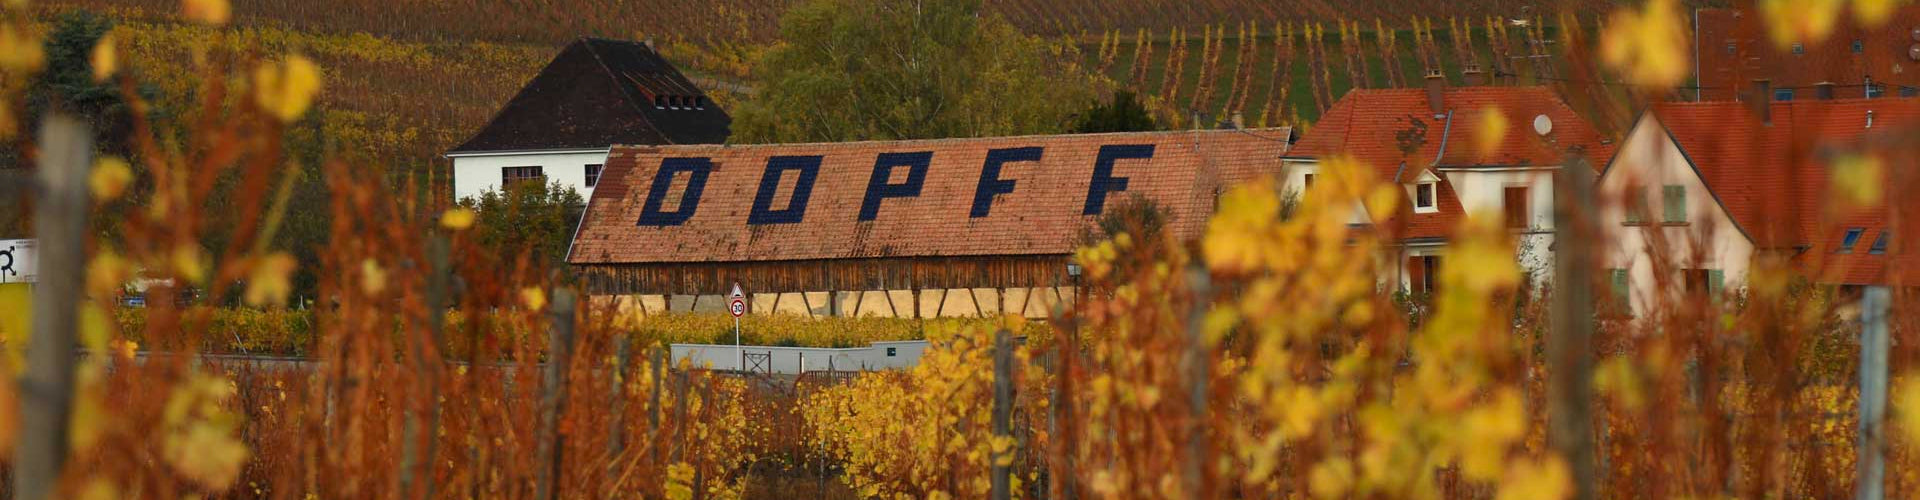 Roof of Dopff Winery through Vineyards